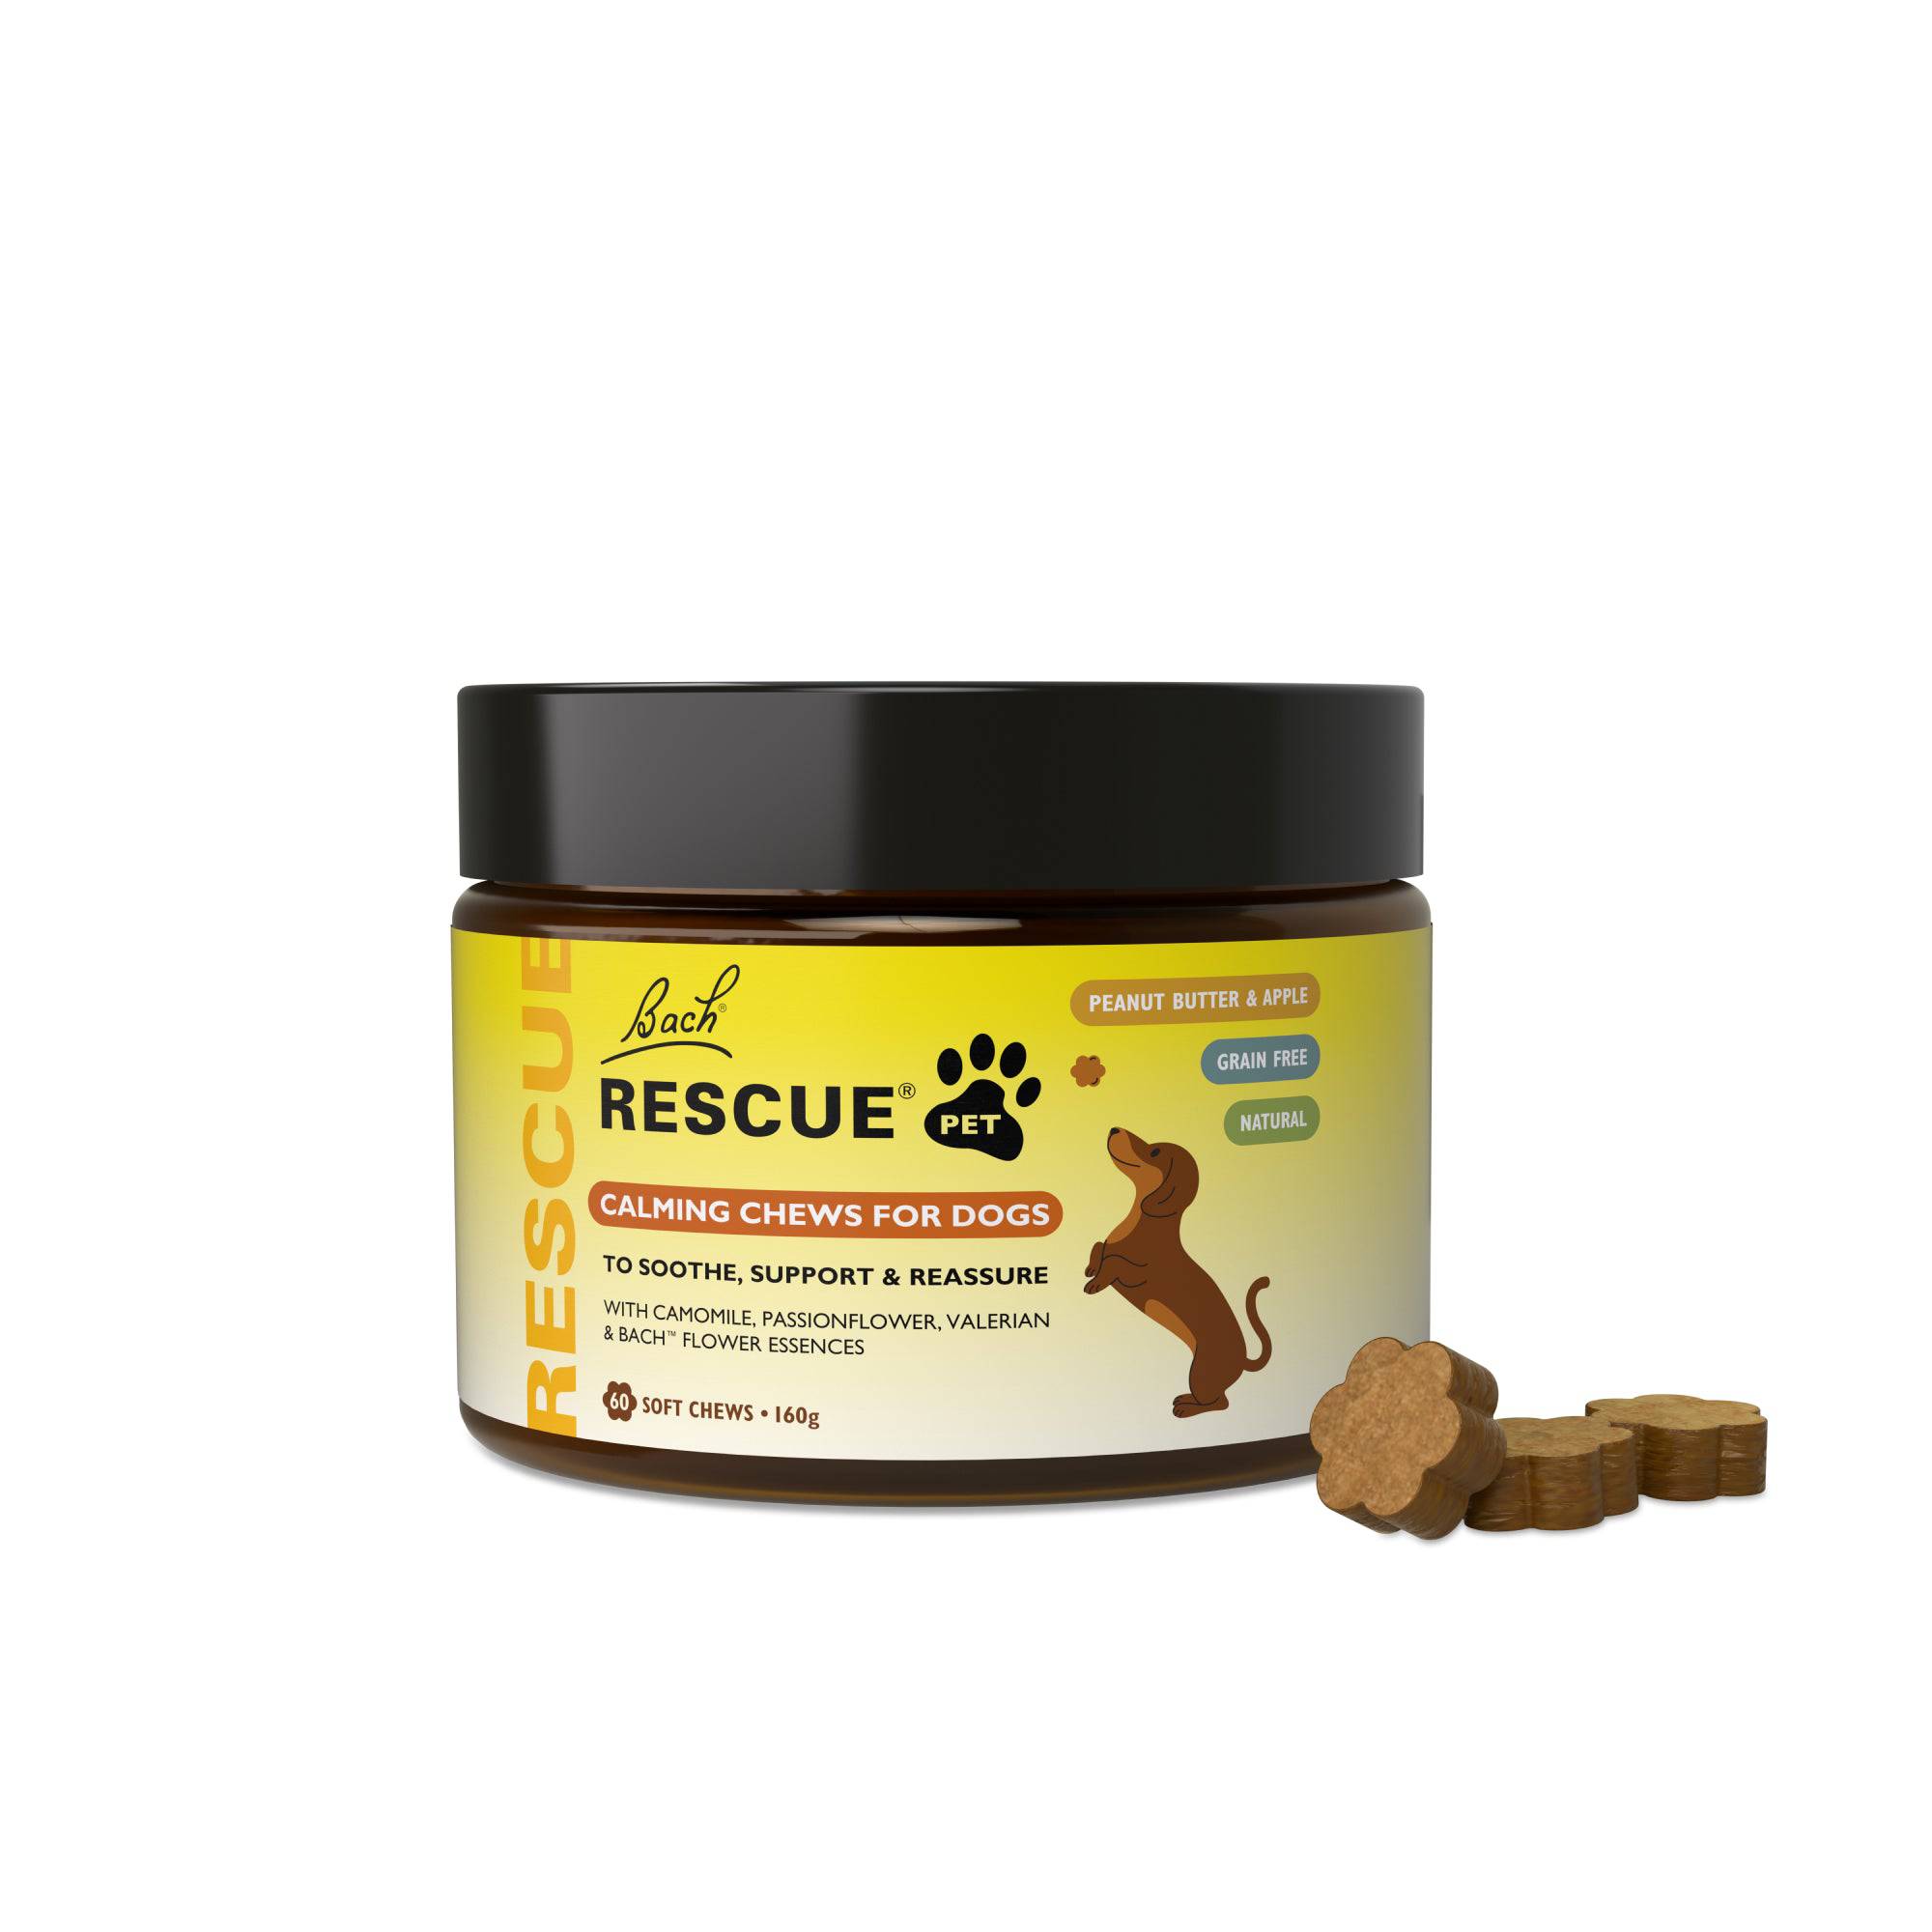 RESCUE® Pet Calming Chews for Dogs - Nelson Pharmacies Limited